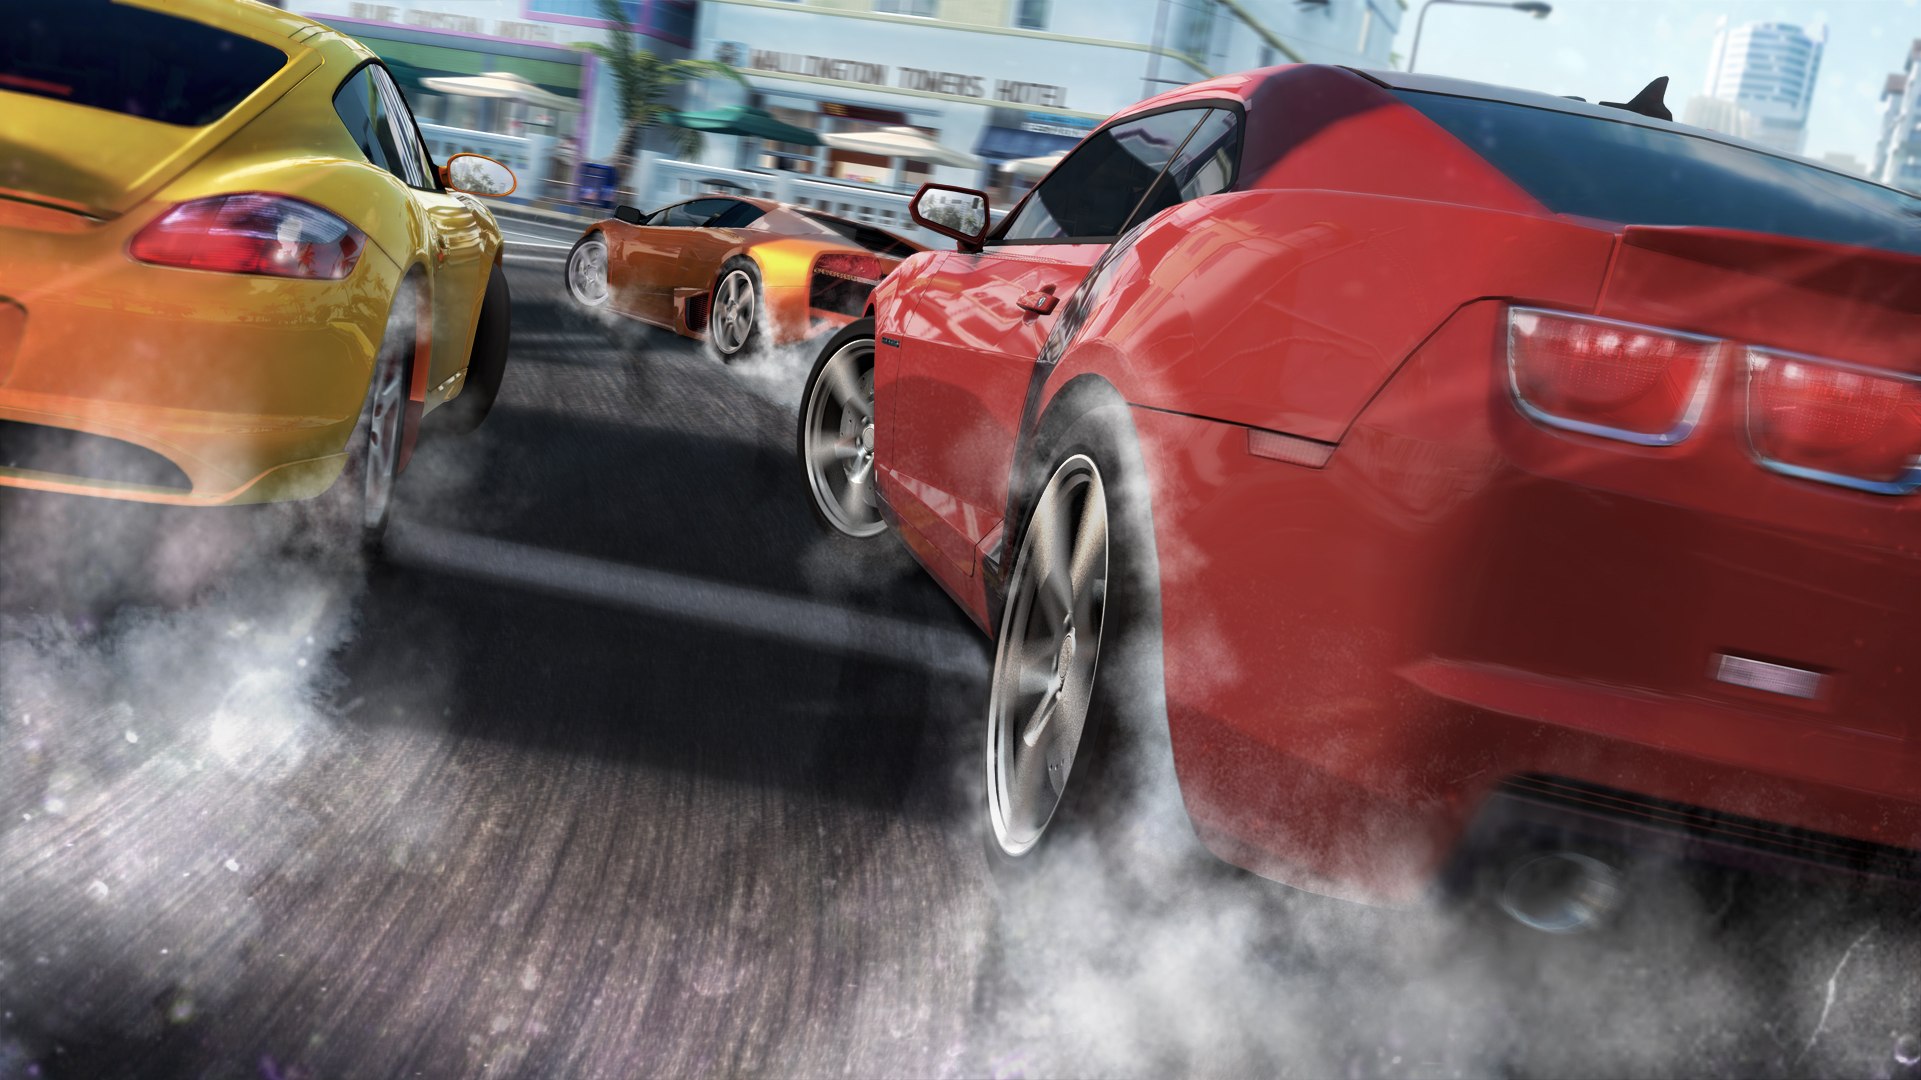 Free download wallpaper Video Game, The Crew on your PC desktop